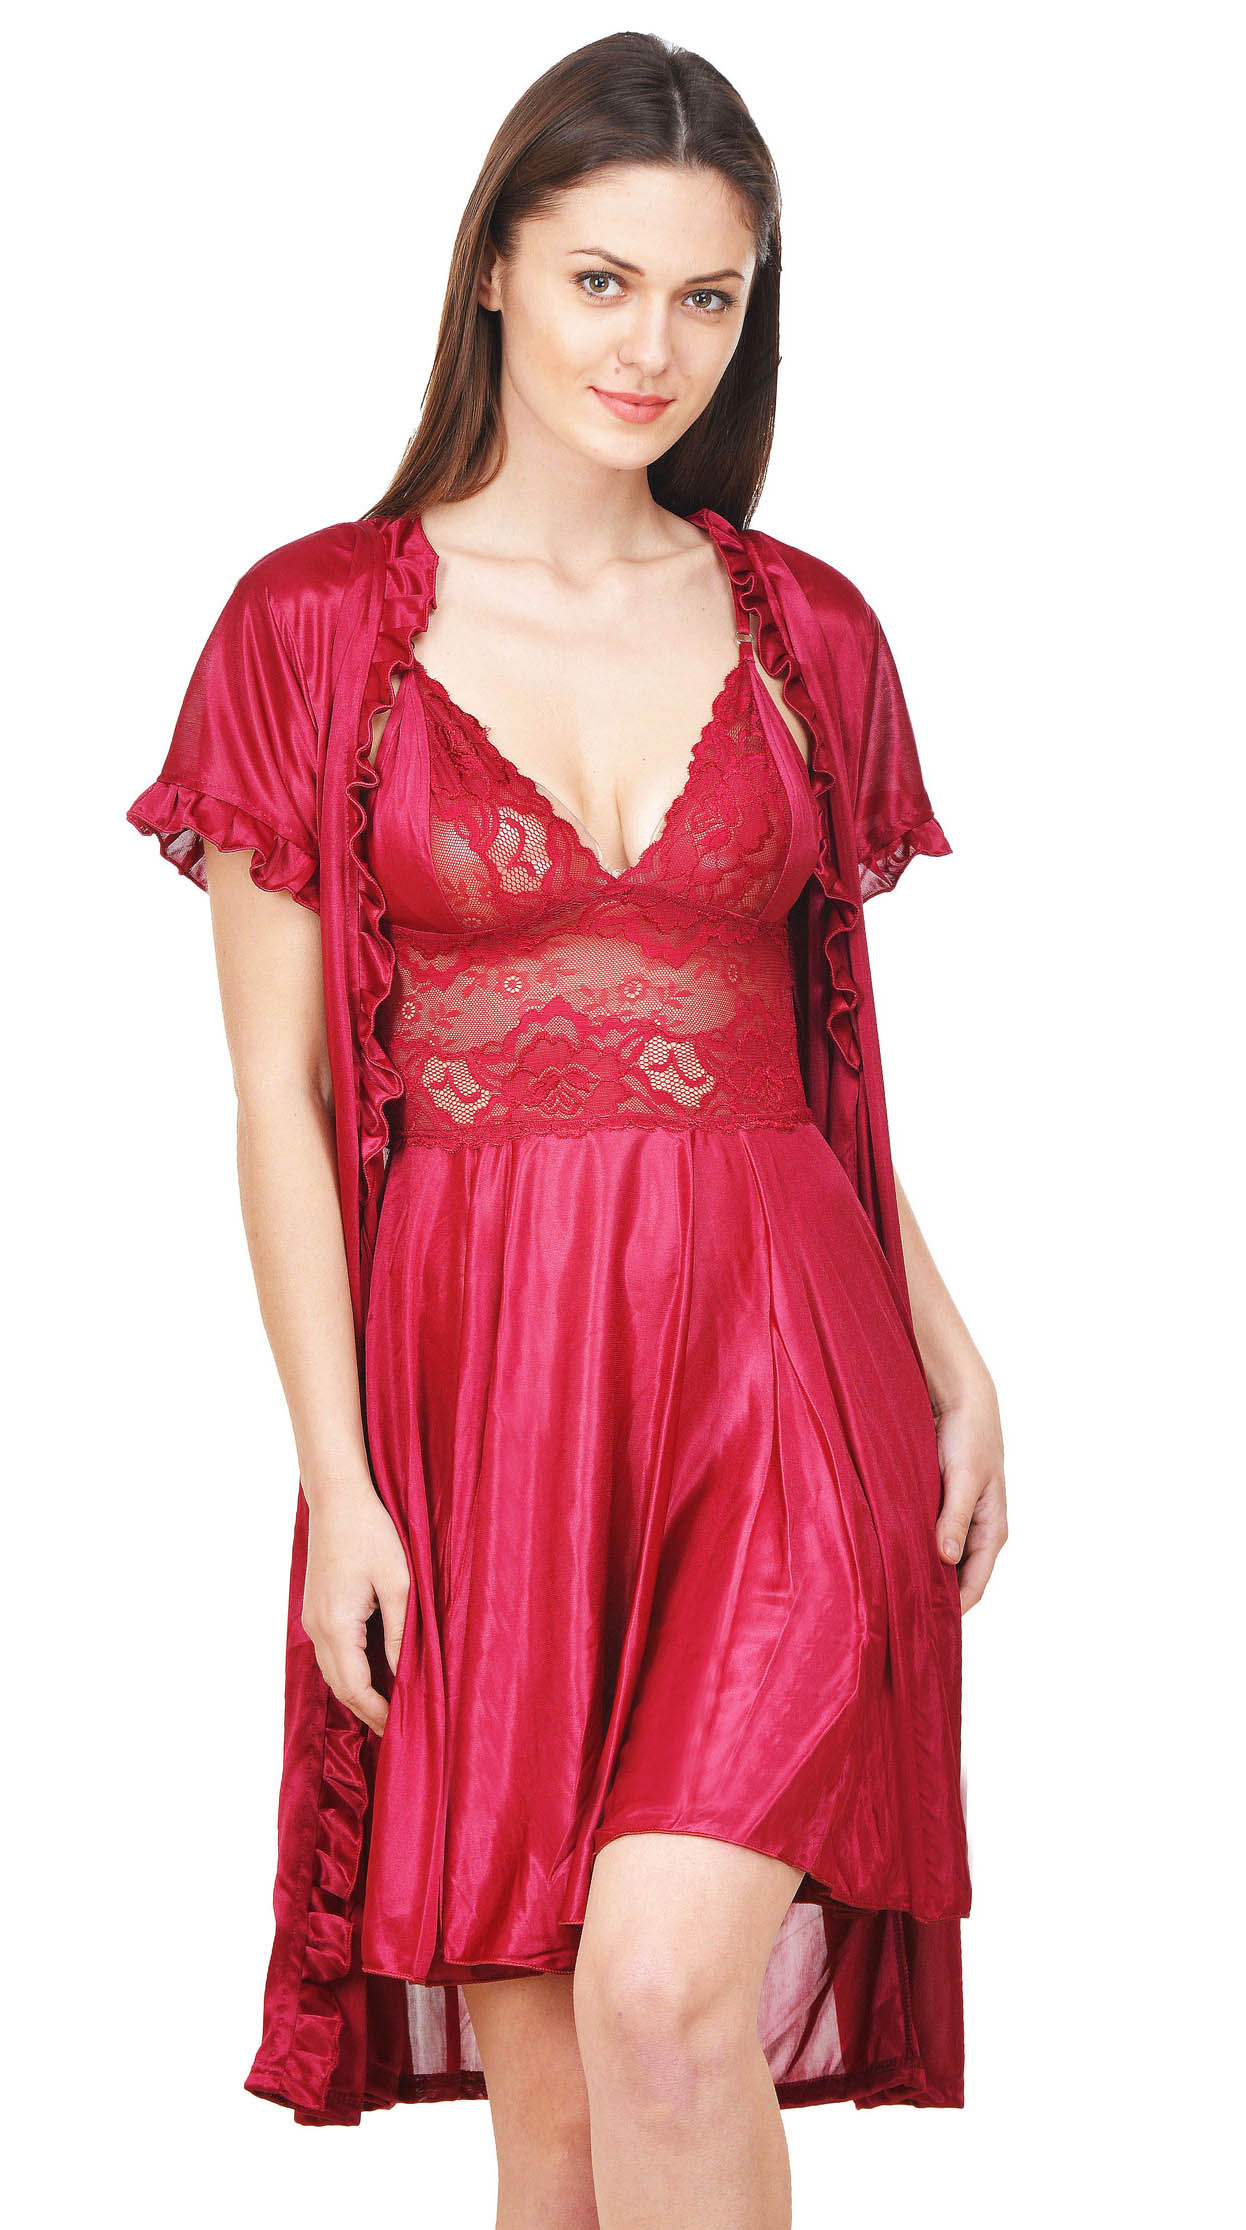 Buy Boosah Red Satin 1 Nighty And 1 Robe Set Online ₹649 From Shopclues